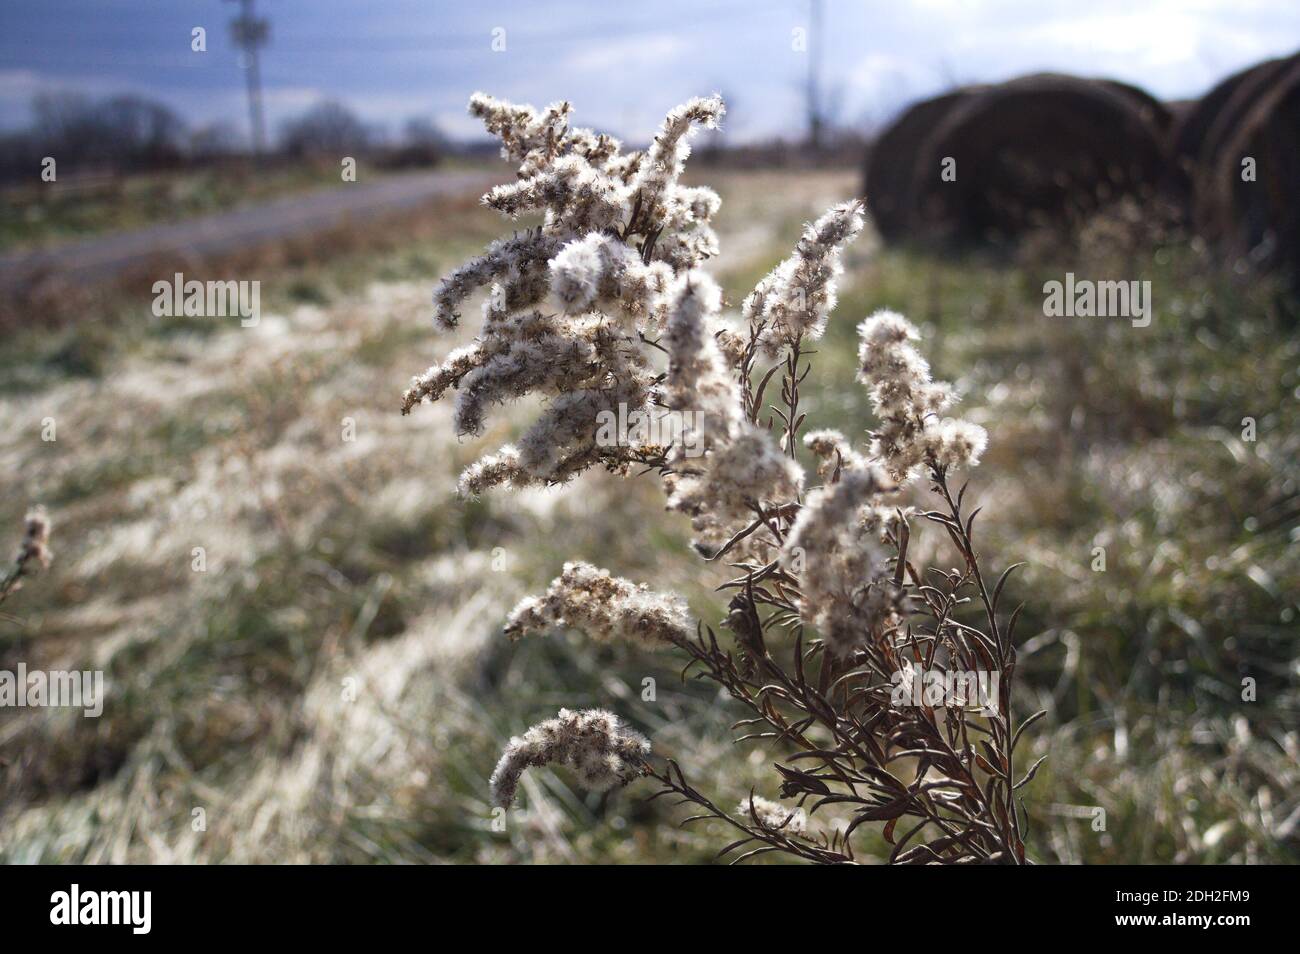 A goldenrod plant that has gone to seed blows in the fall breeze on a sunny Missouri day. Stock Photo